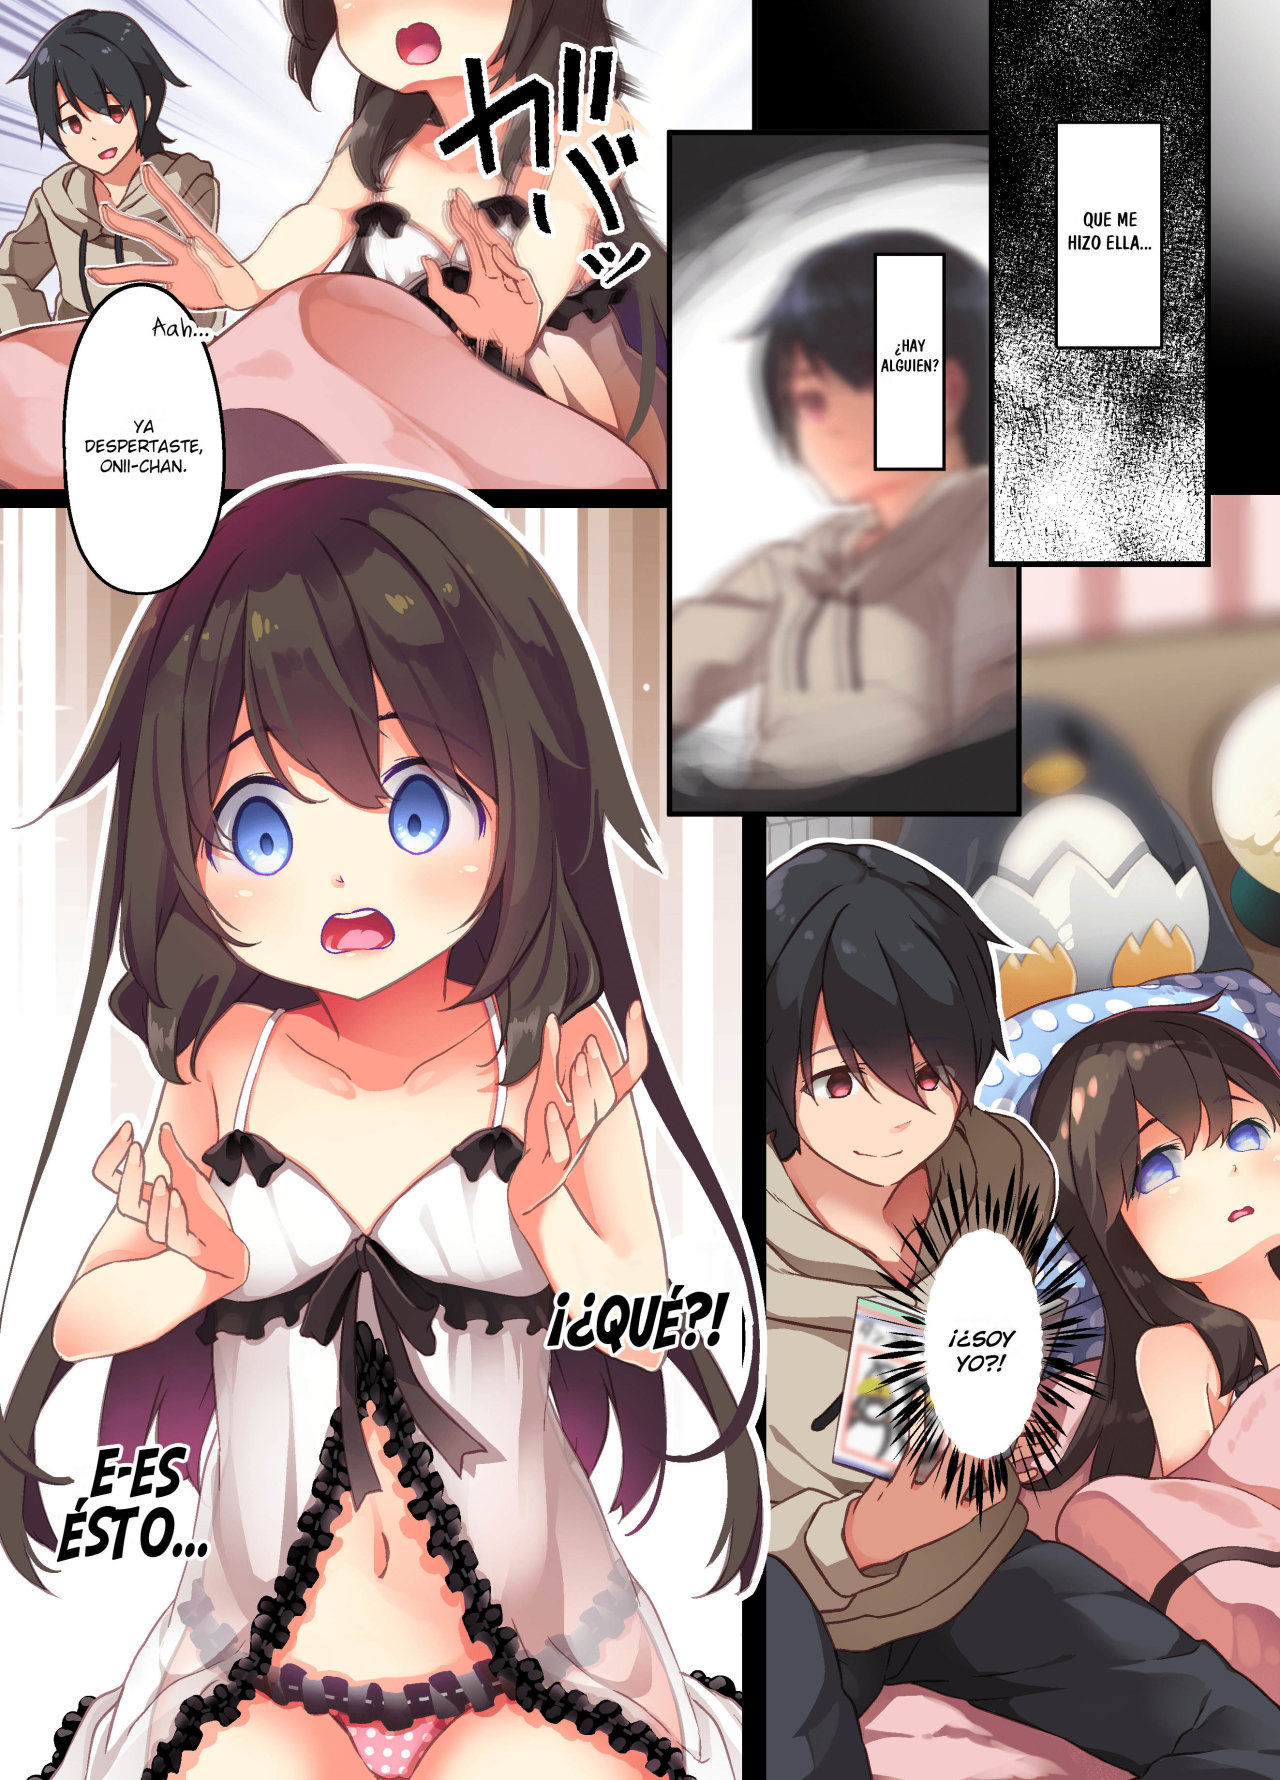 A Yandere Little Sister wants to be impregnated by her big brother - 9